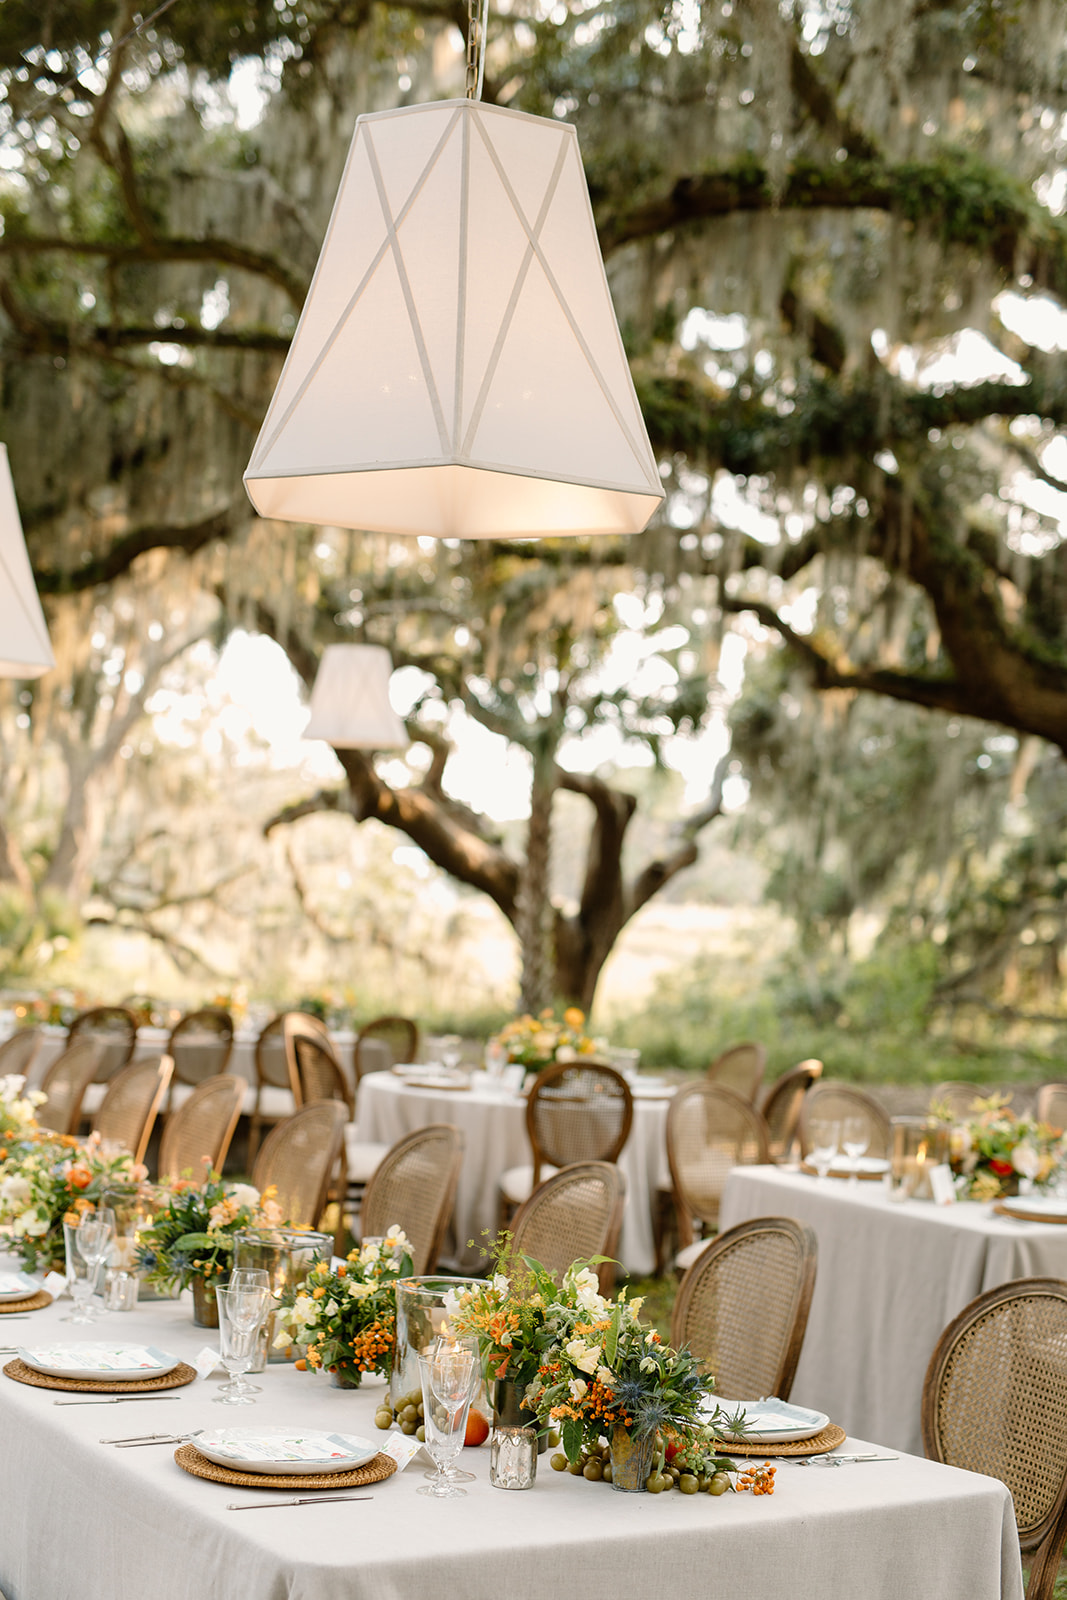 How to Ensure Consistency in Your Wedding Design